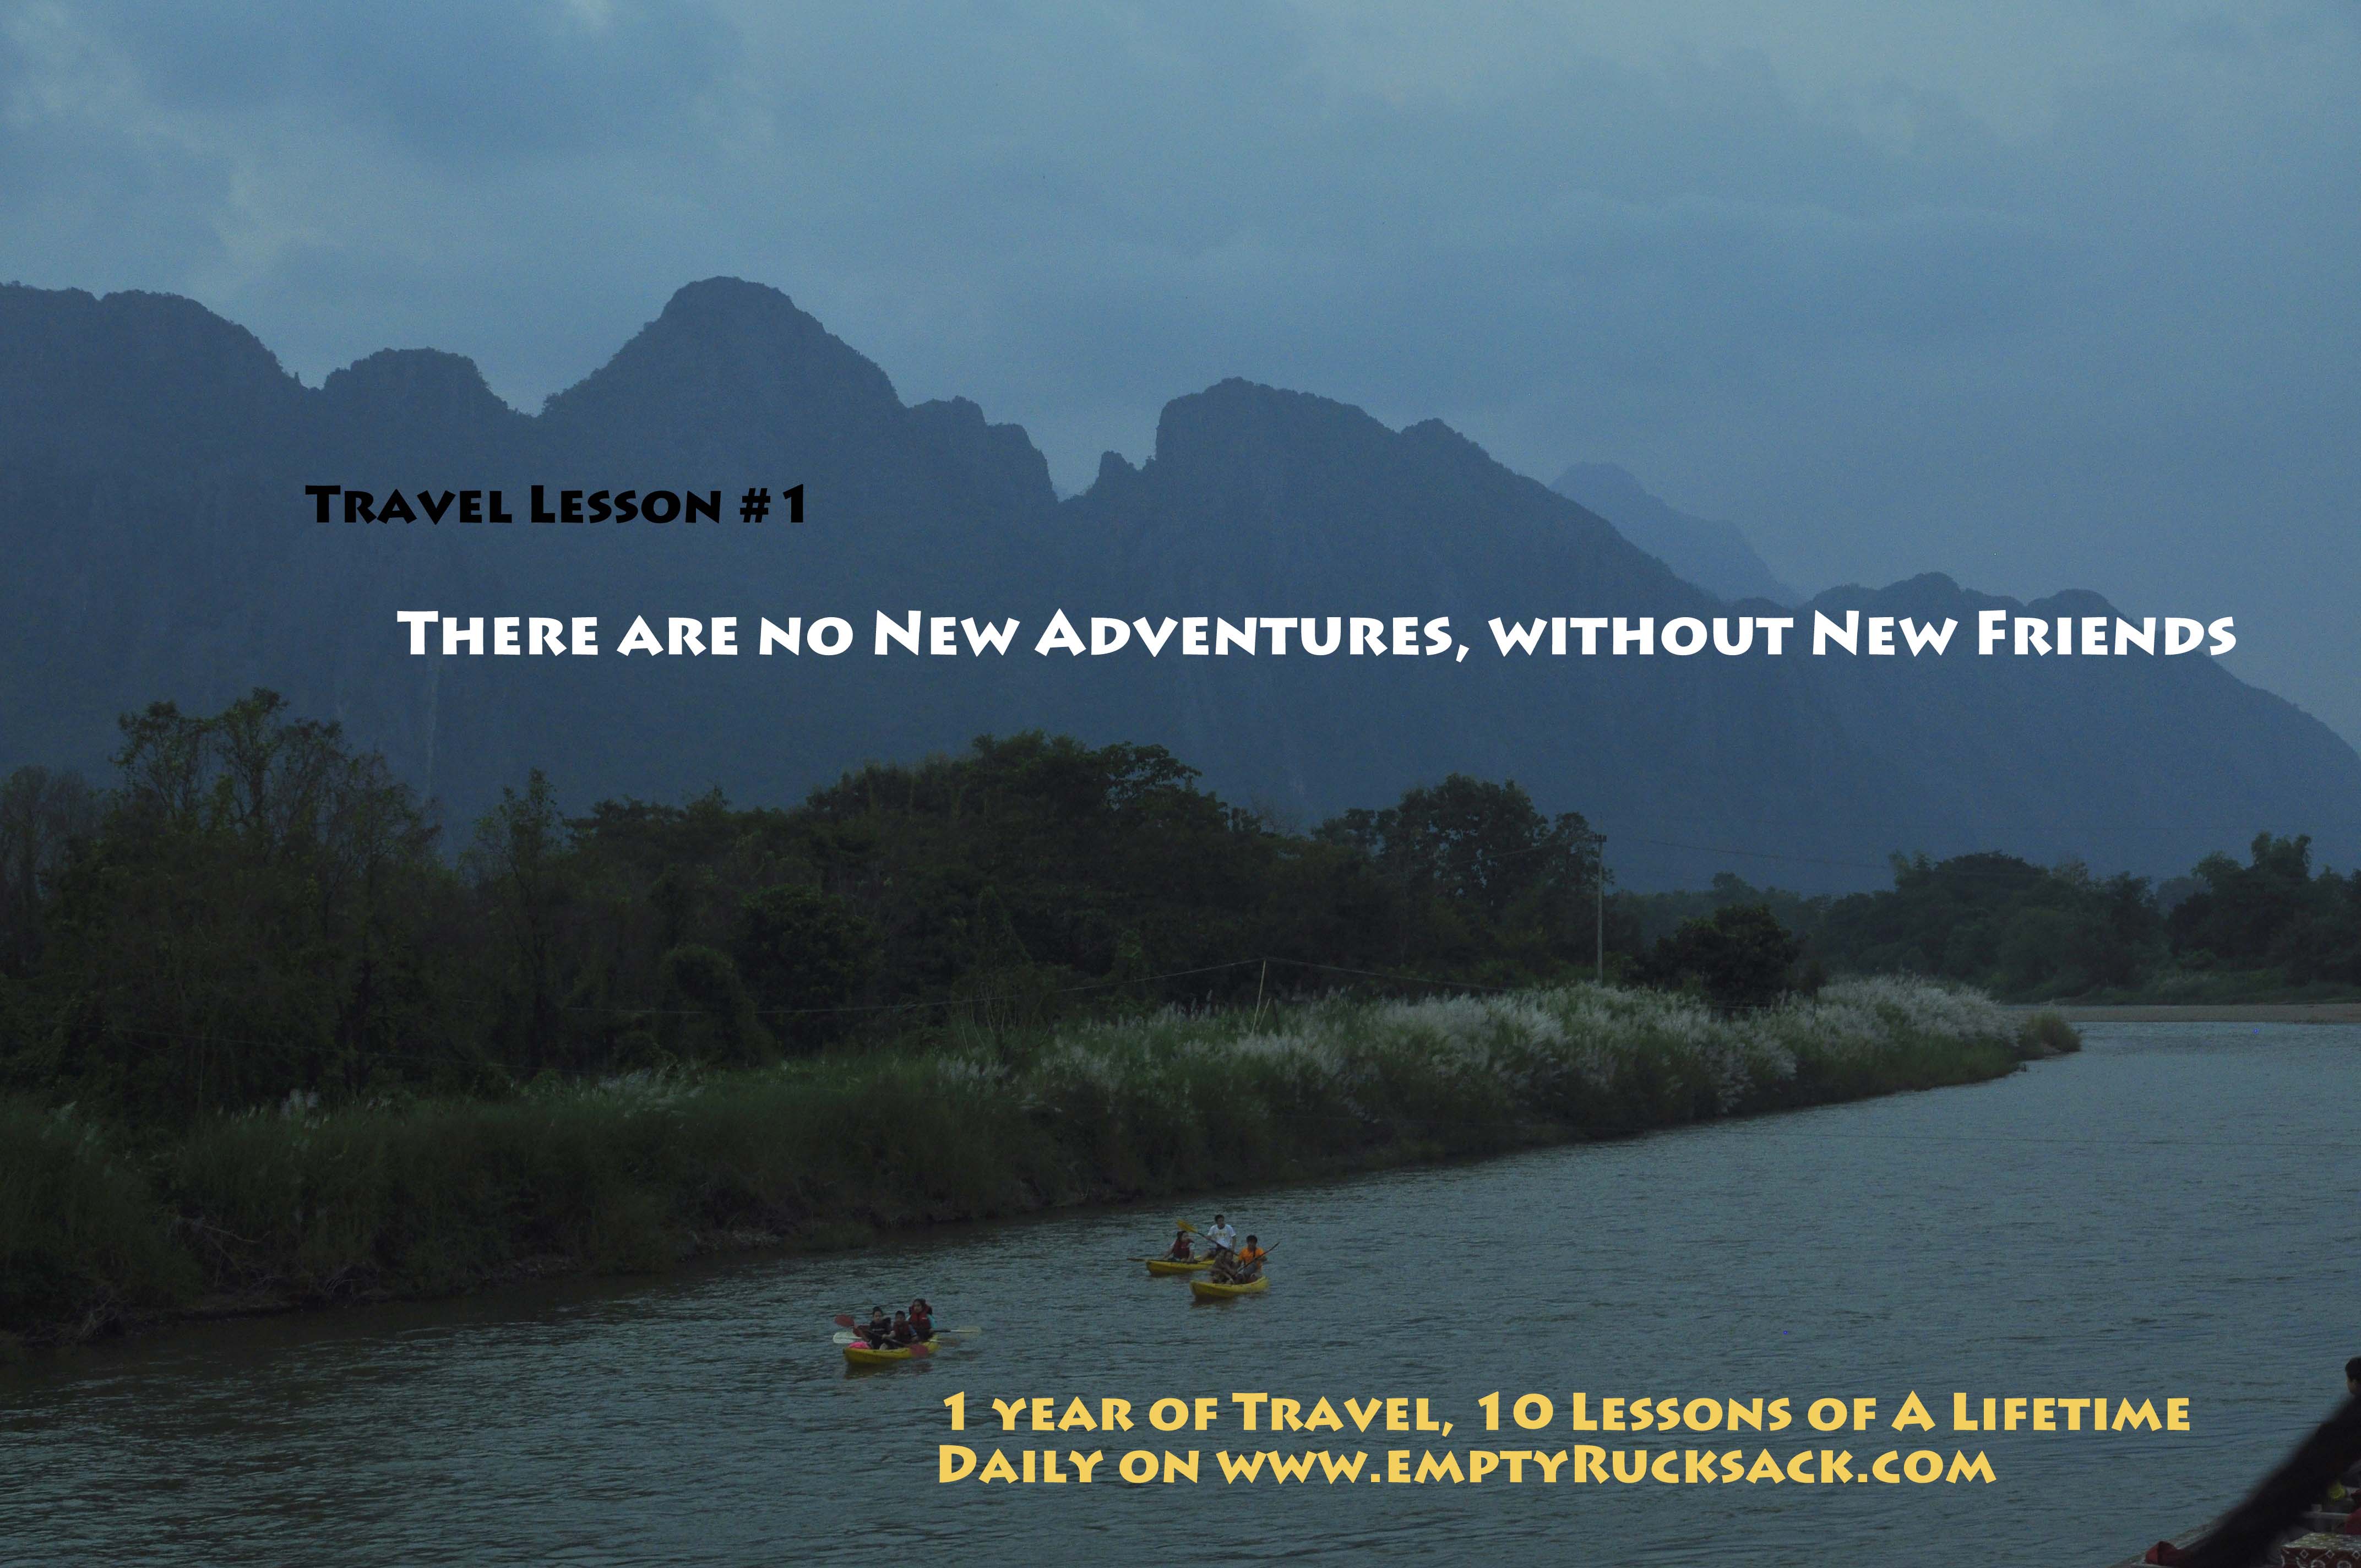 Travel Lesson 1: There are no new adventures, without new friends